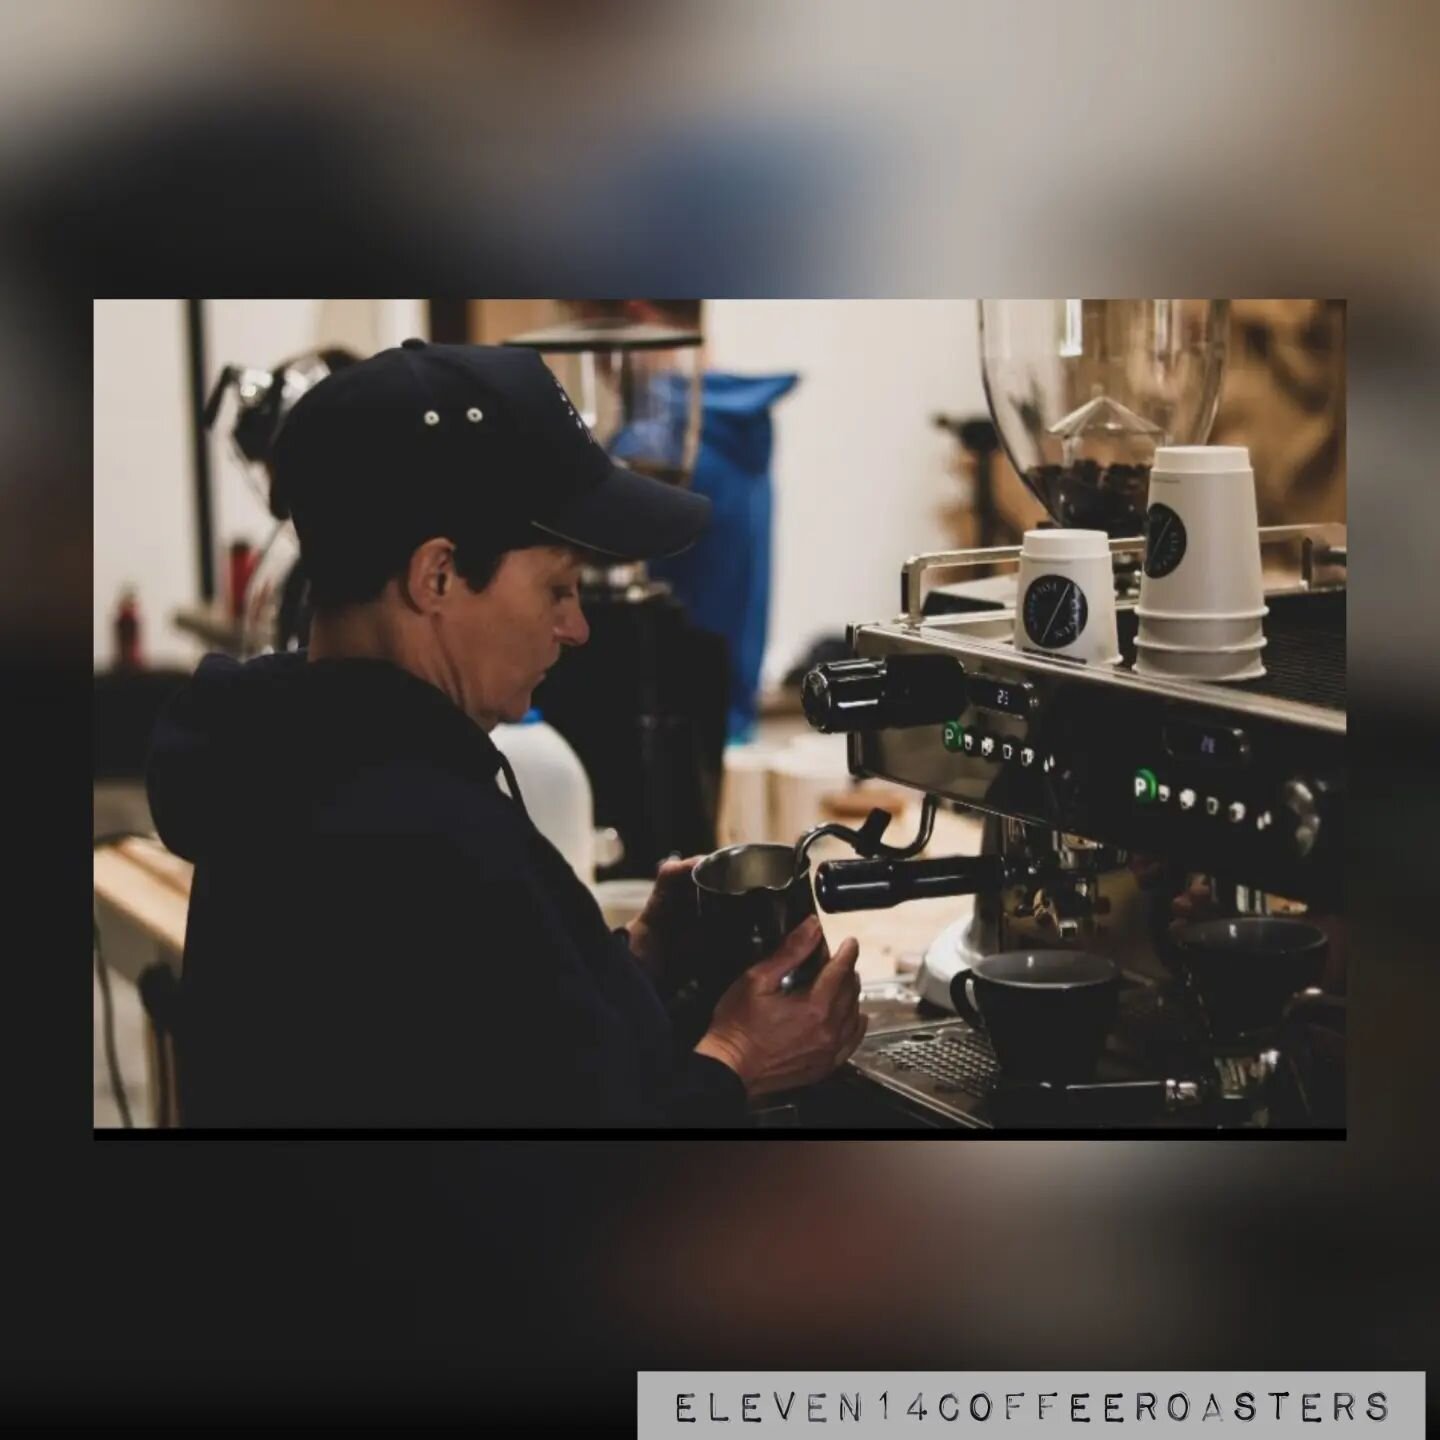 Behind every great coffee is a talented barista 👌🏻 Espresso bar open until 3.30pm.

#eleven14coffee #coffeeroasters #coffee #barista #coffeeart #espressobar #limerickcity #annacotty #localbusiness